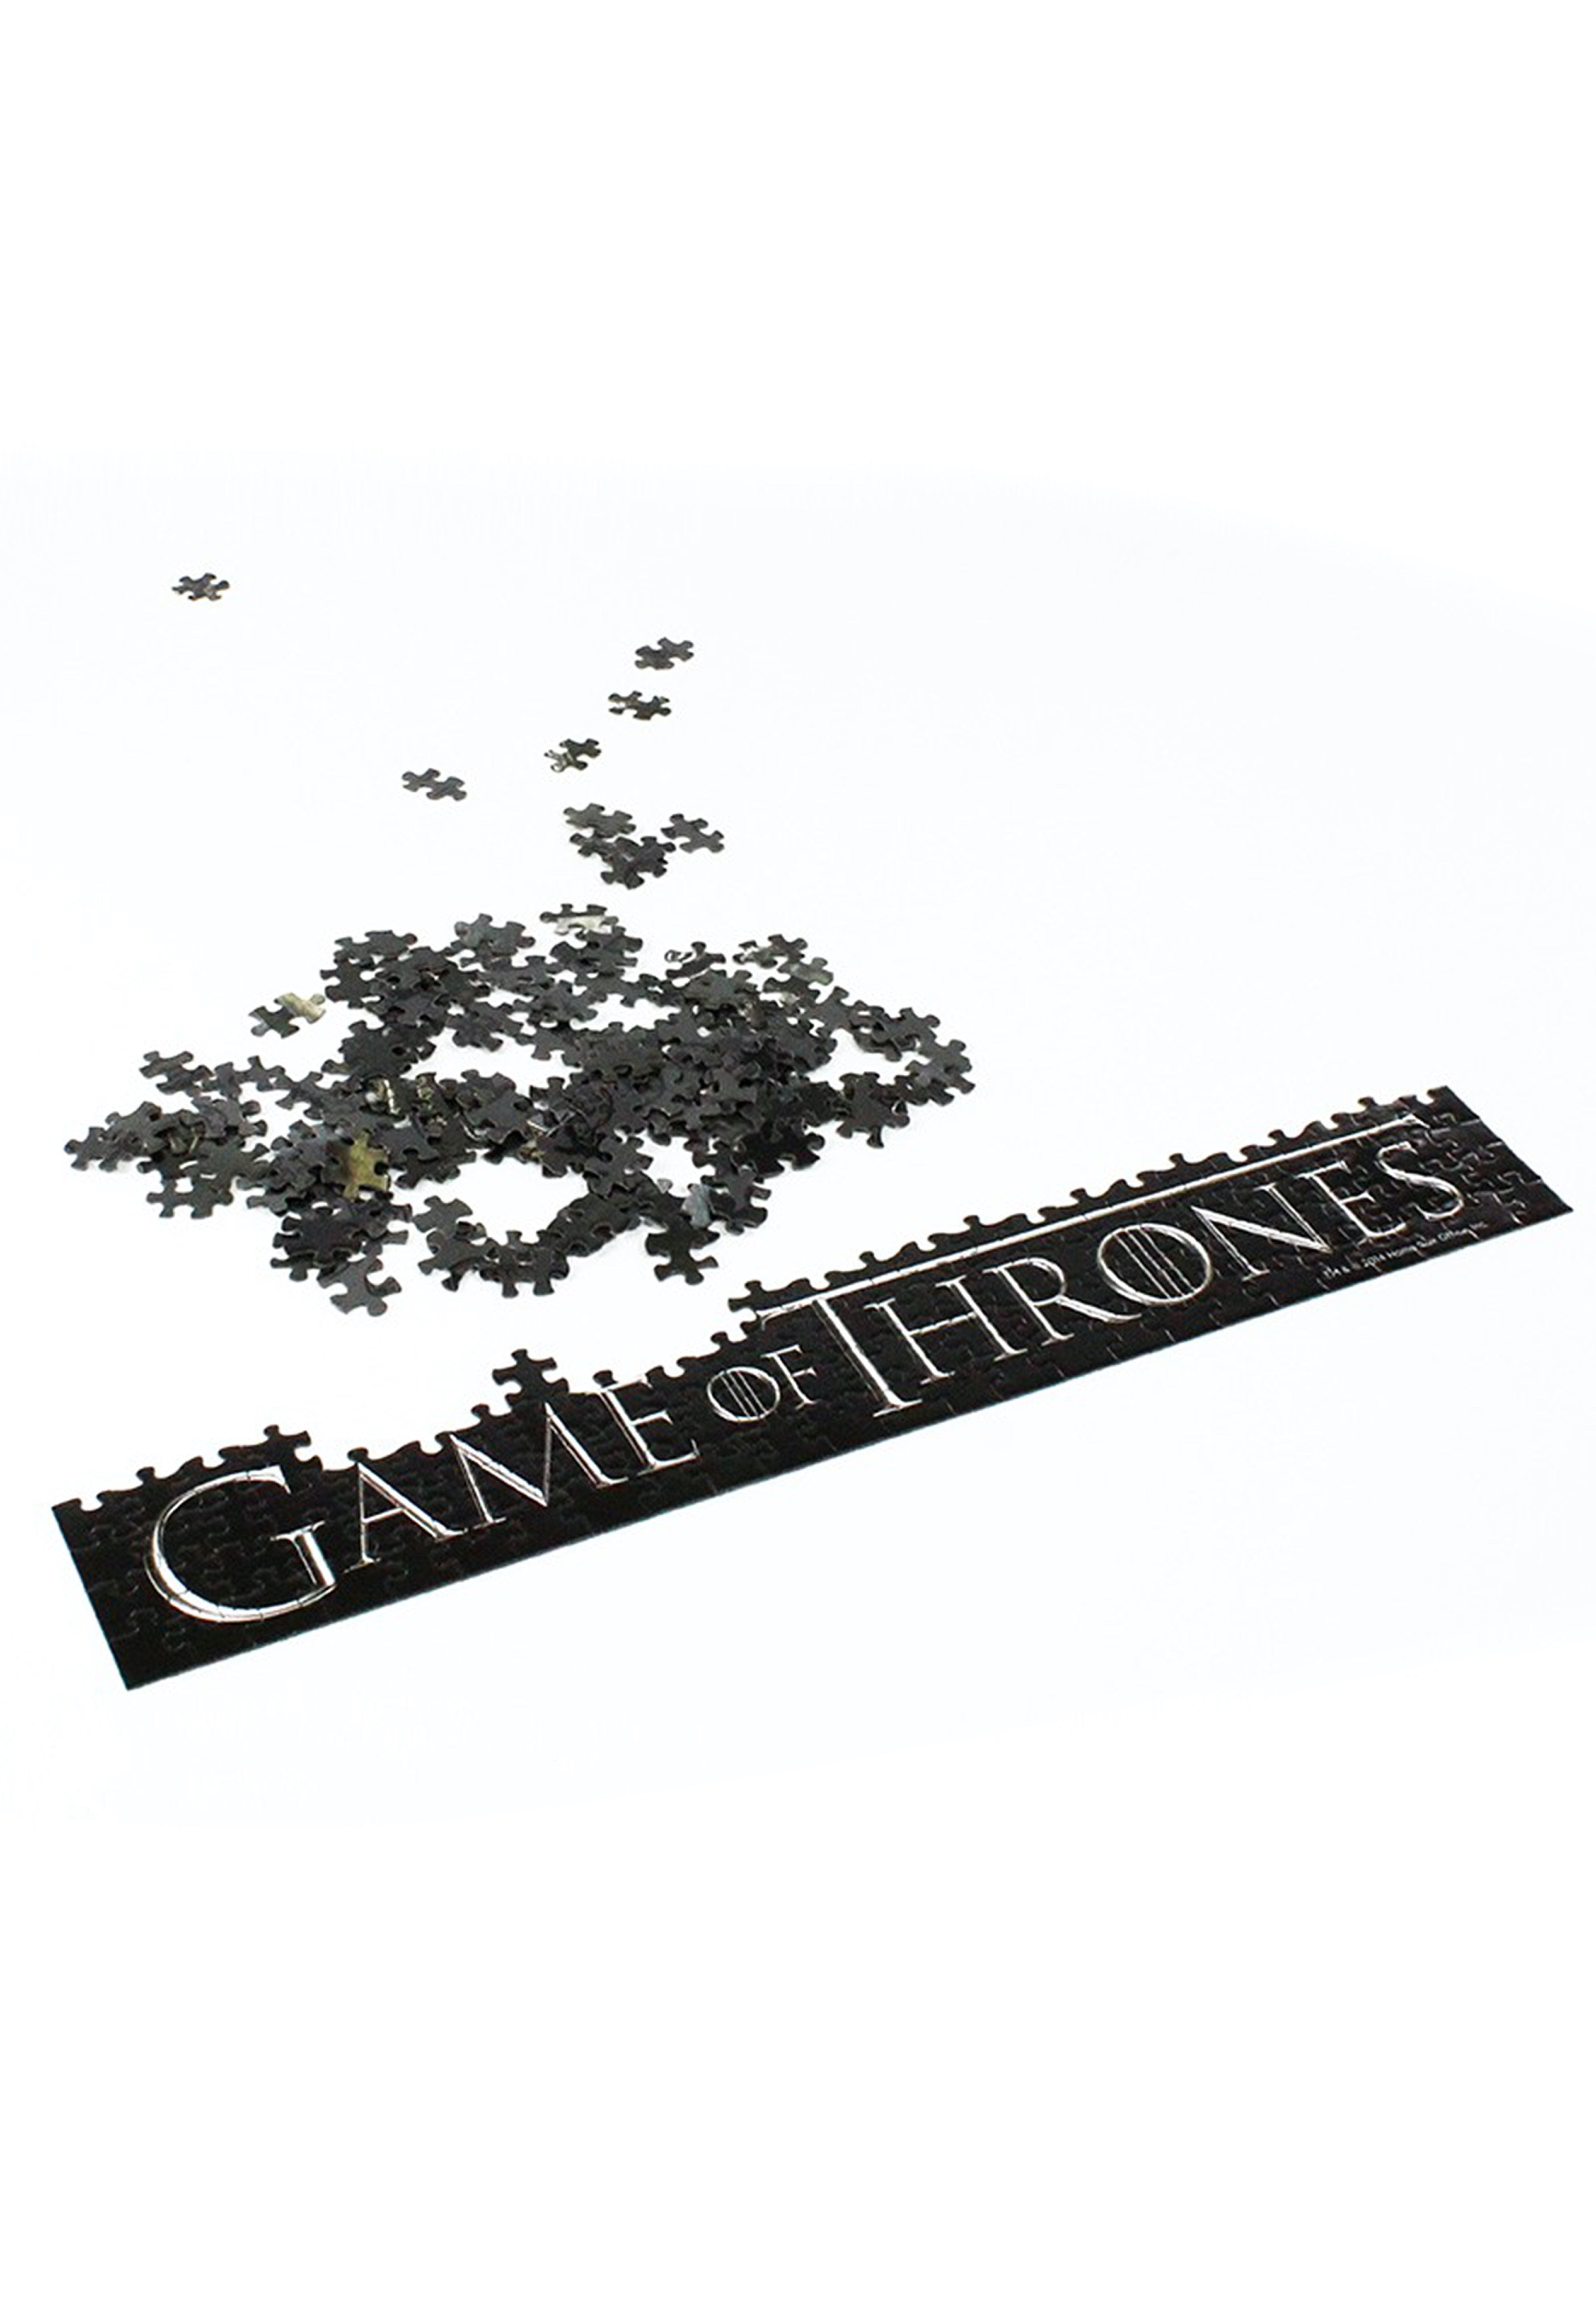 Game Of Thrones - Iron Throne - Jigsaw Puzzle